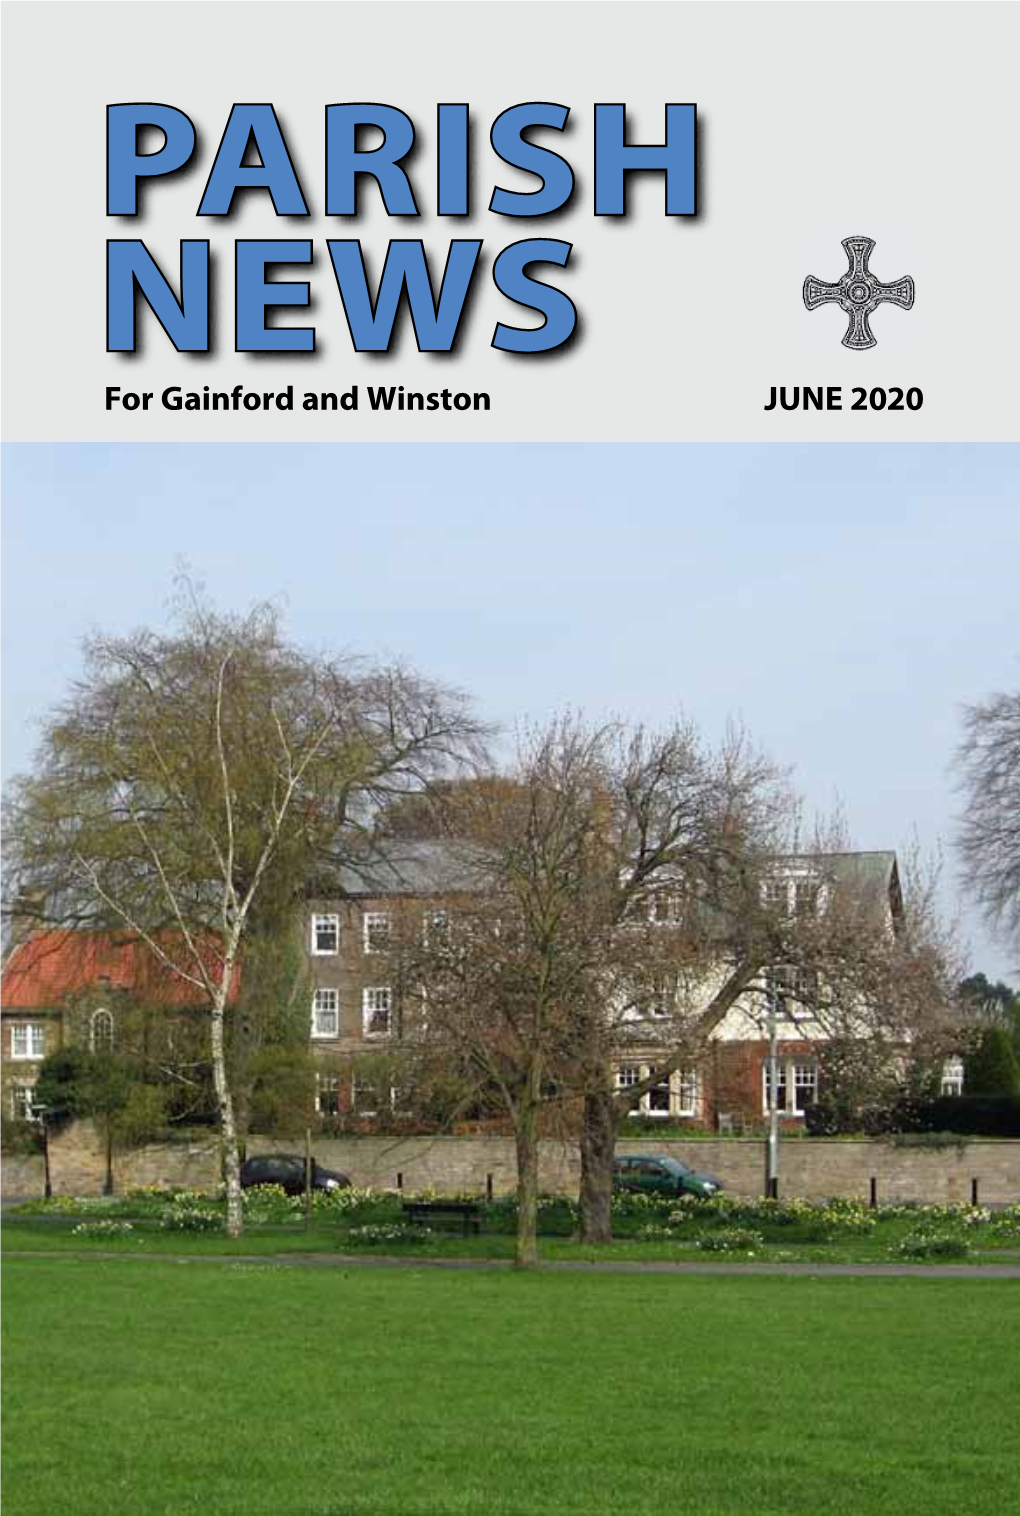 PARISH NEWS for Gainford and Winston JUNE 2020